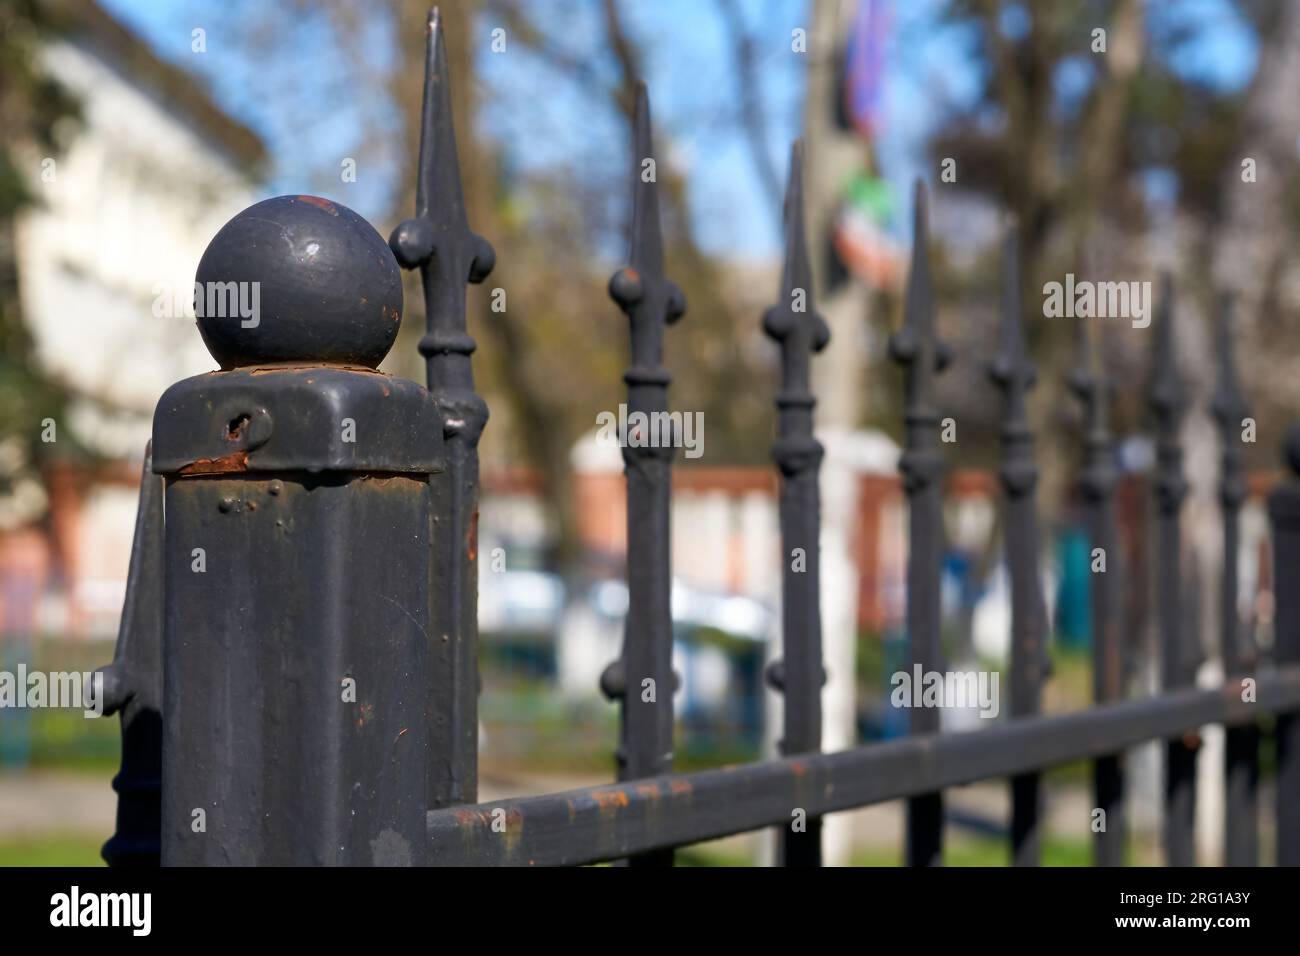 Metal black fence with spear shaped points bars on a real street Stock Photo